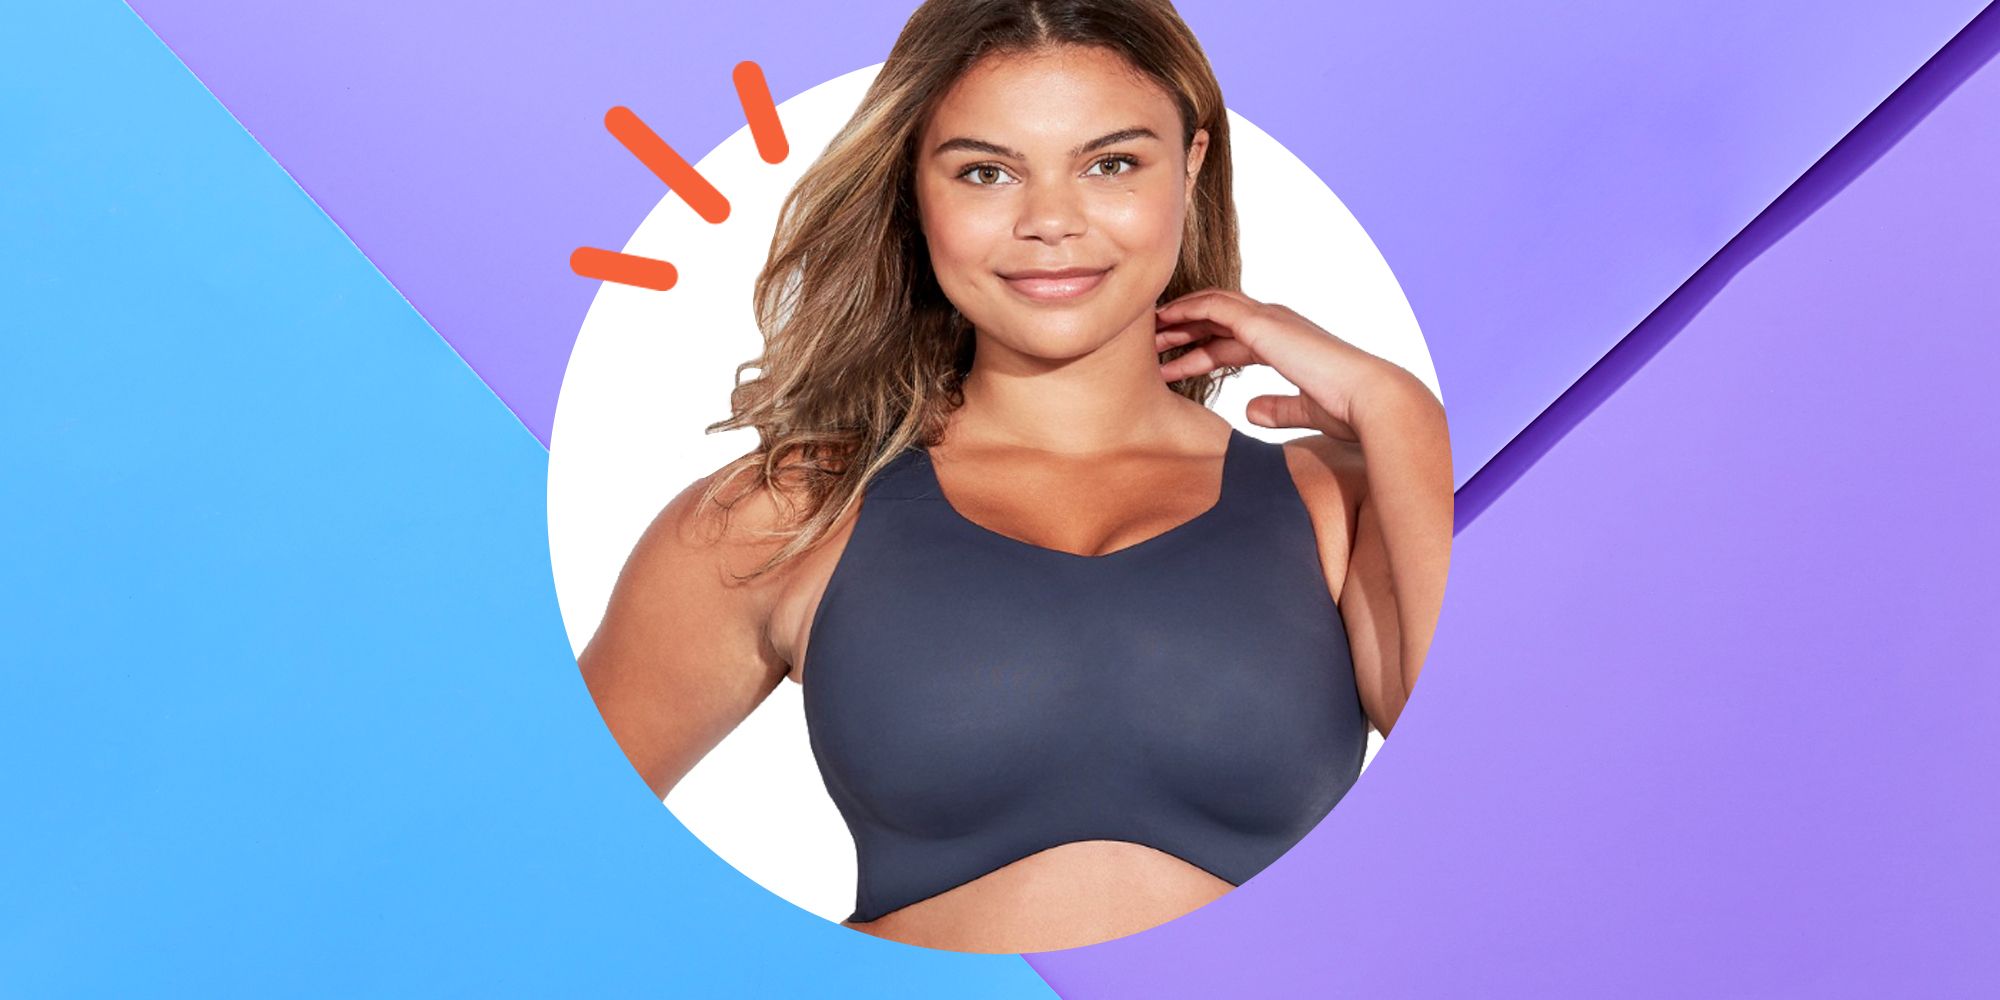 Girls with big boobs wearing tight shirts 11 Best Sports Bras For Women With Big Boobs Sports Bras For Dd